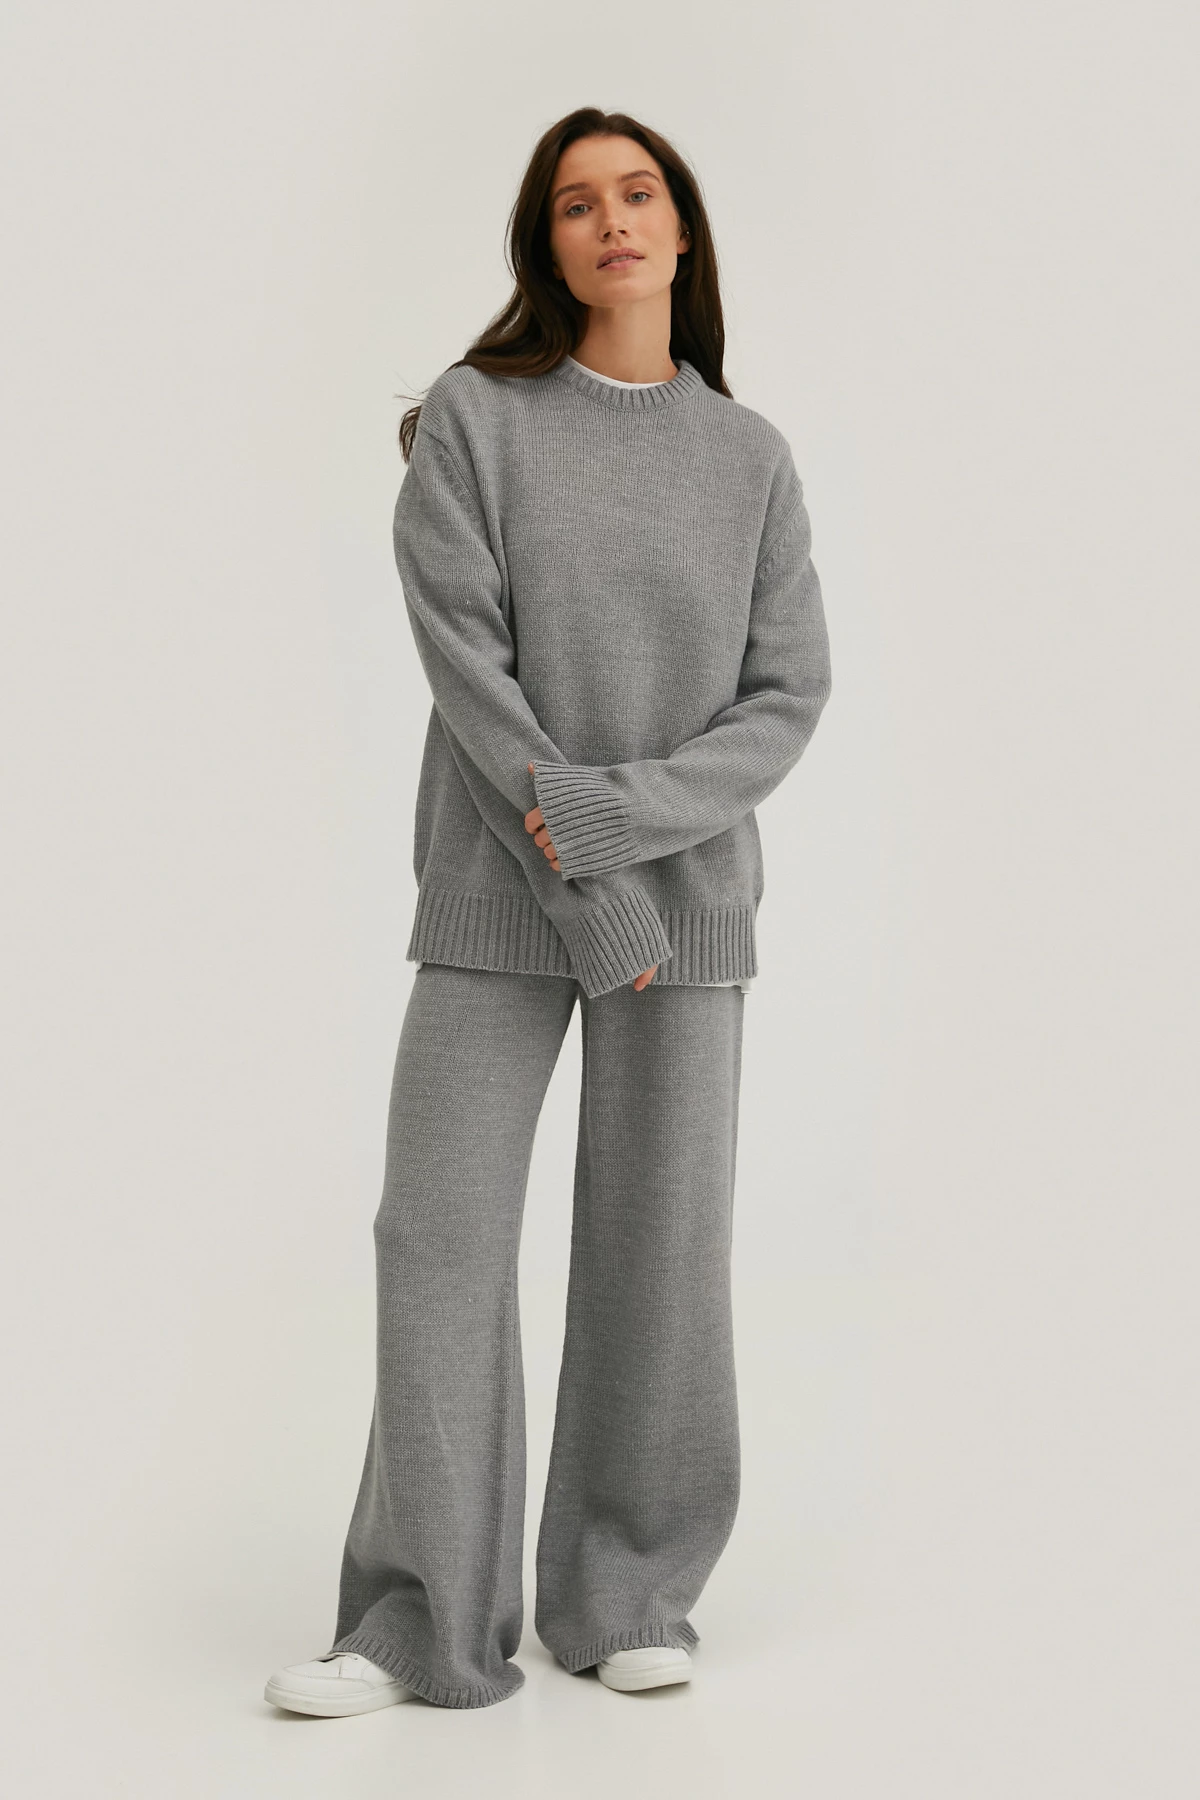 Grey knitted cropped pants with merino wool, photo 1